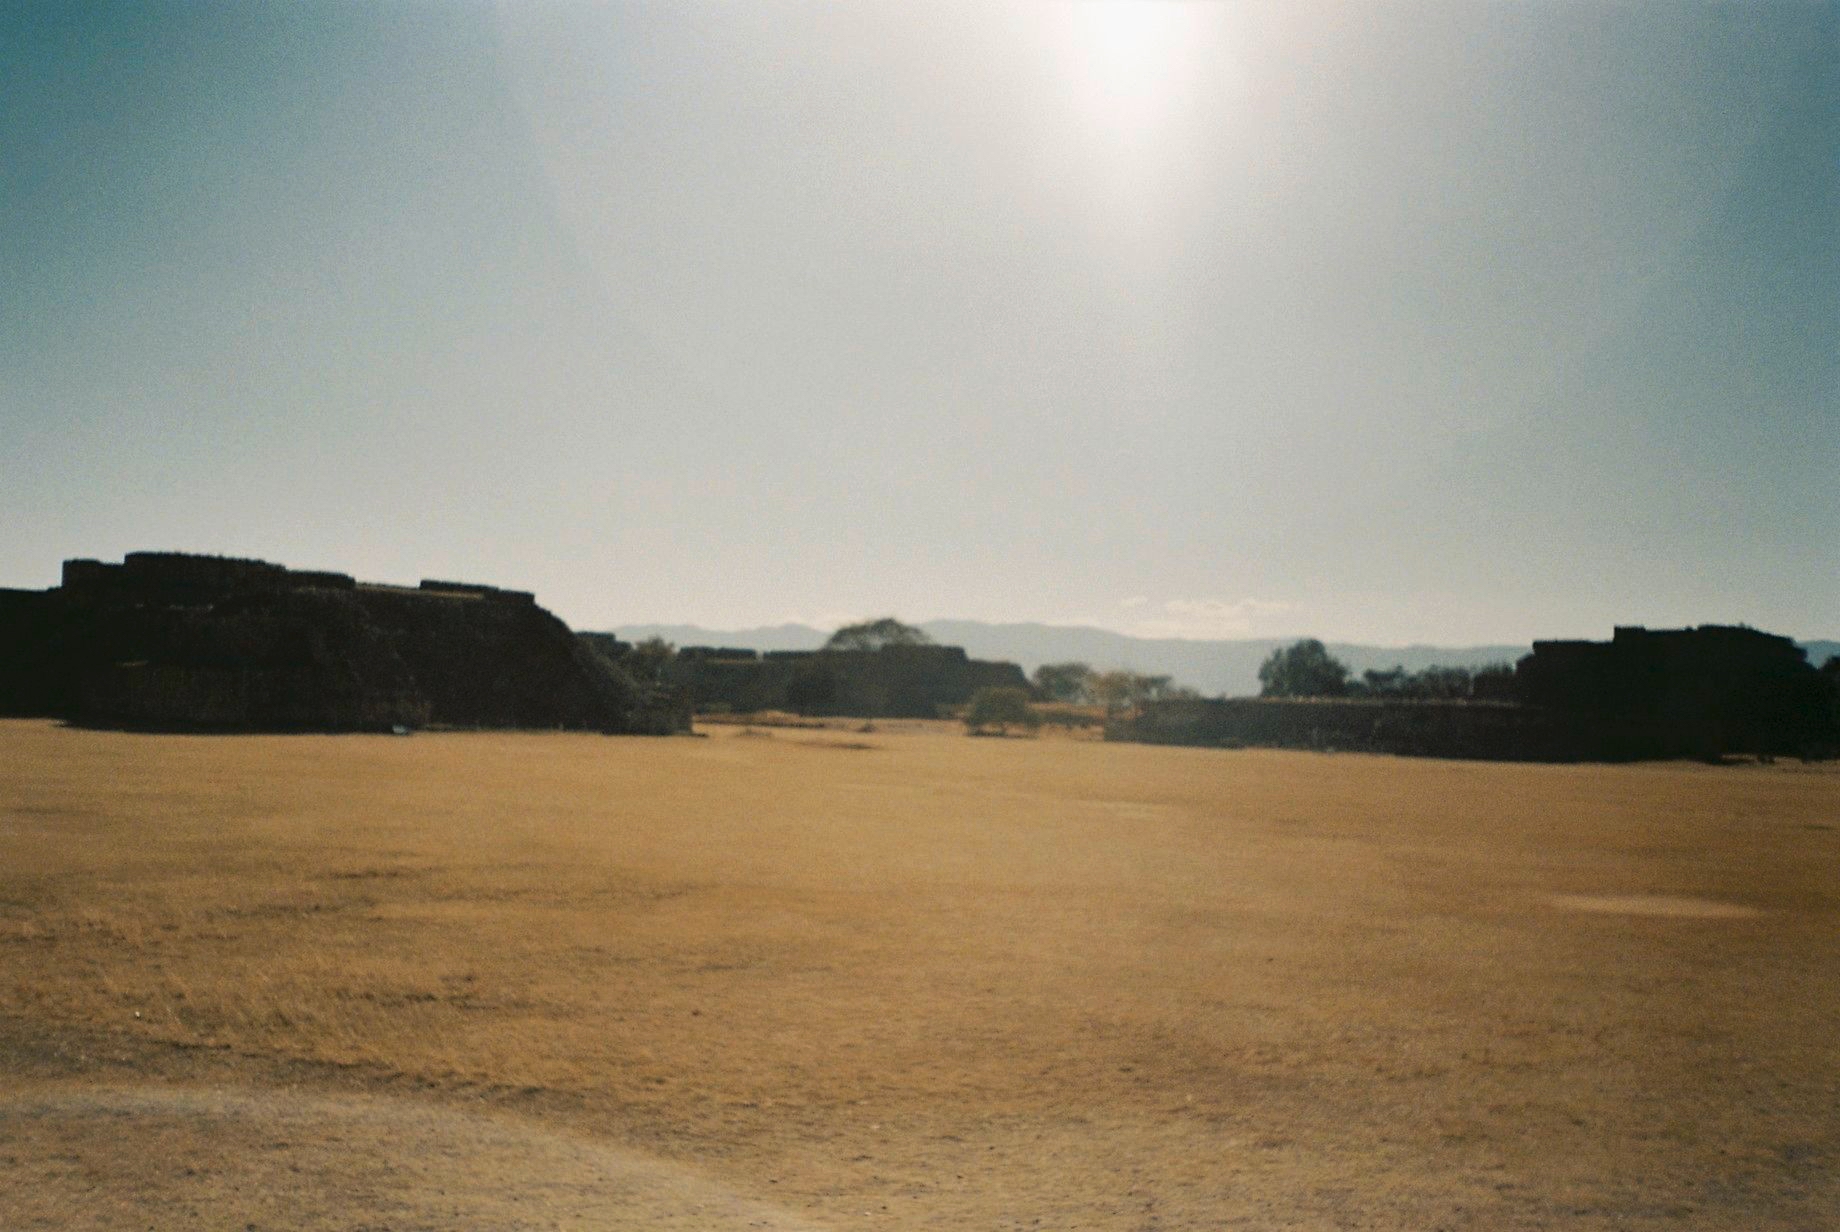 Monte Alban 01-2020 - 7 of 33